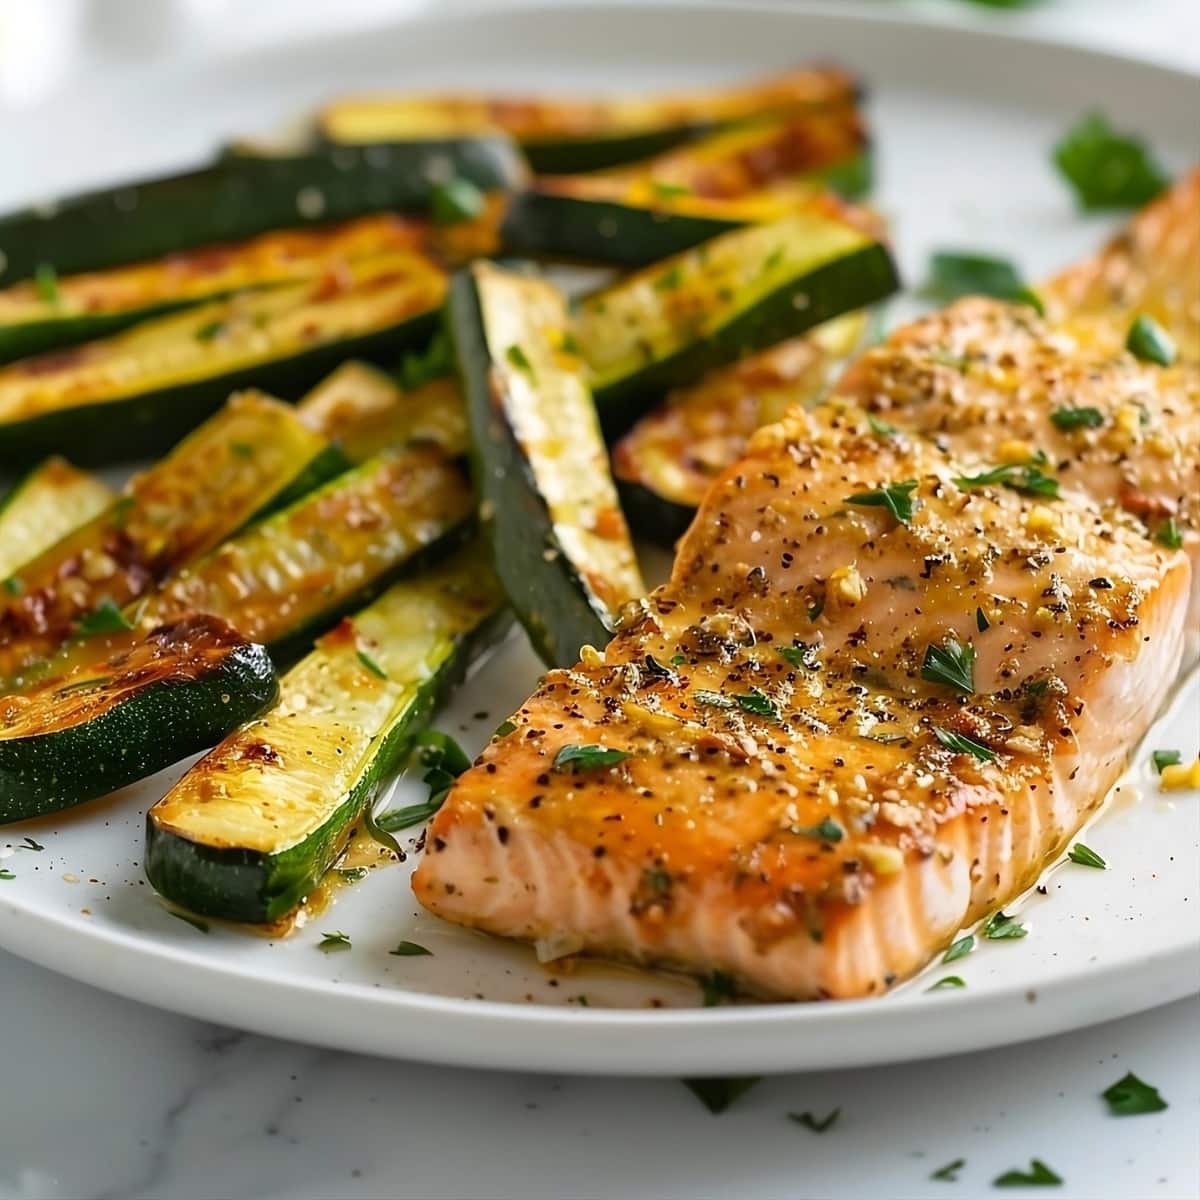 Slice baked salmon served with roasted zucchini sticks.